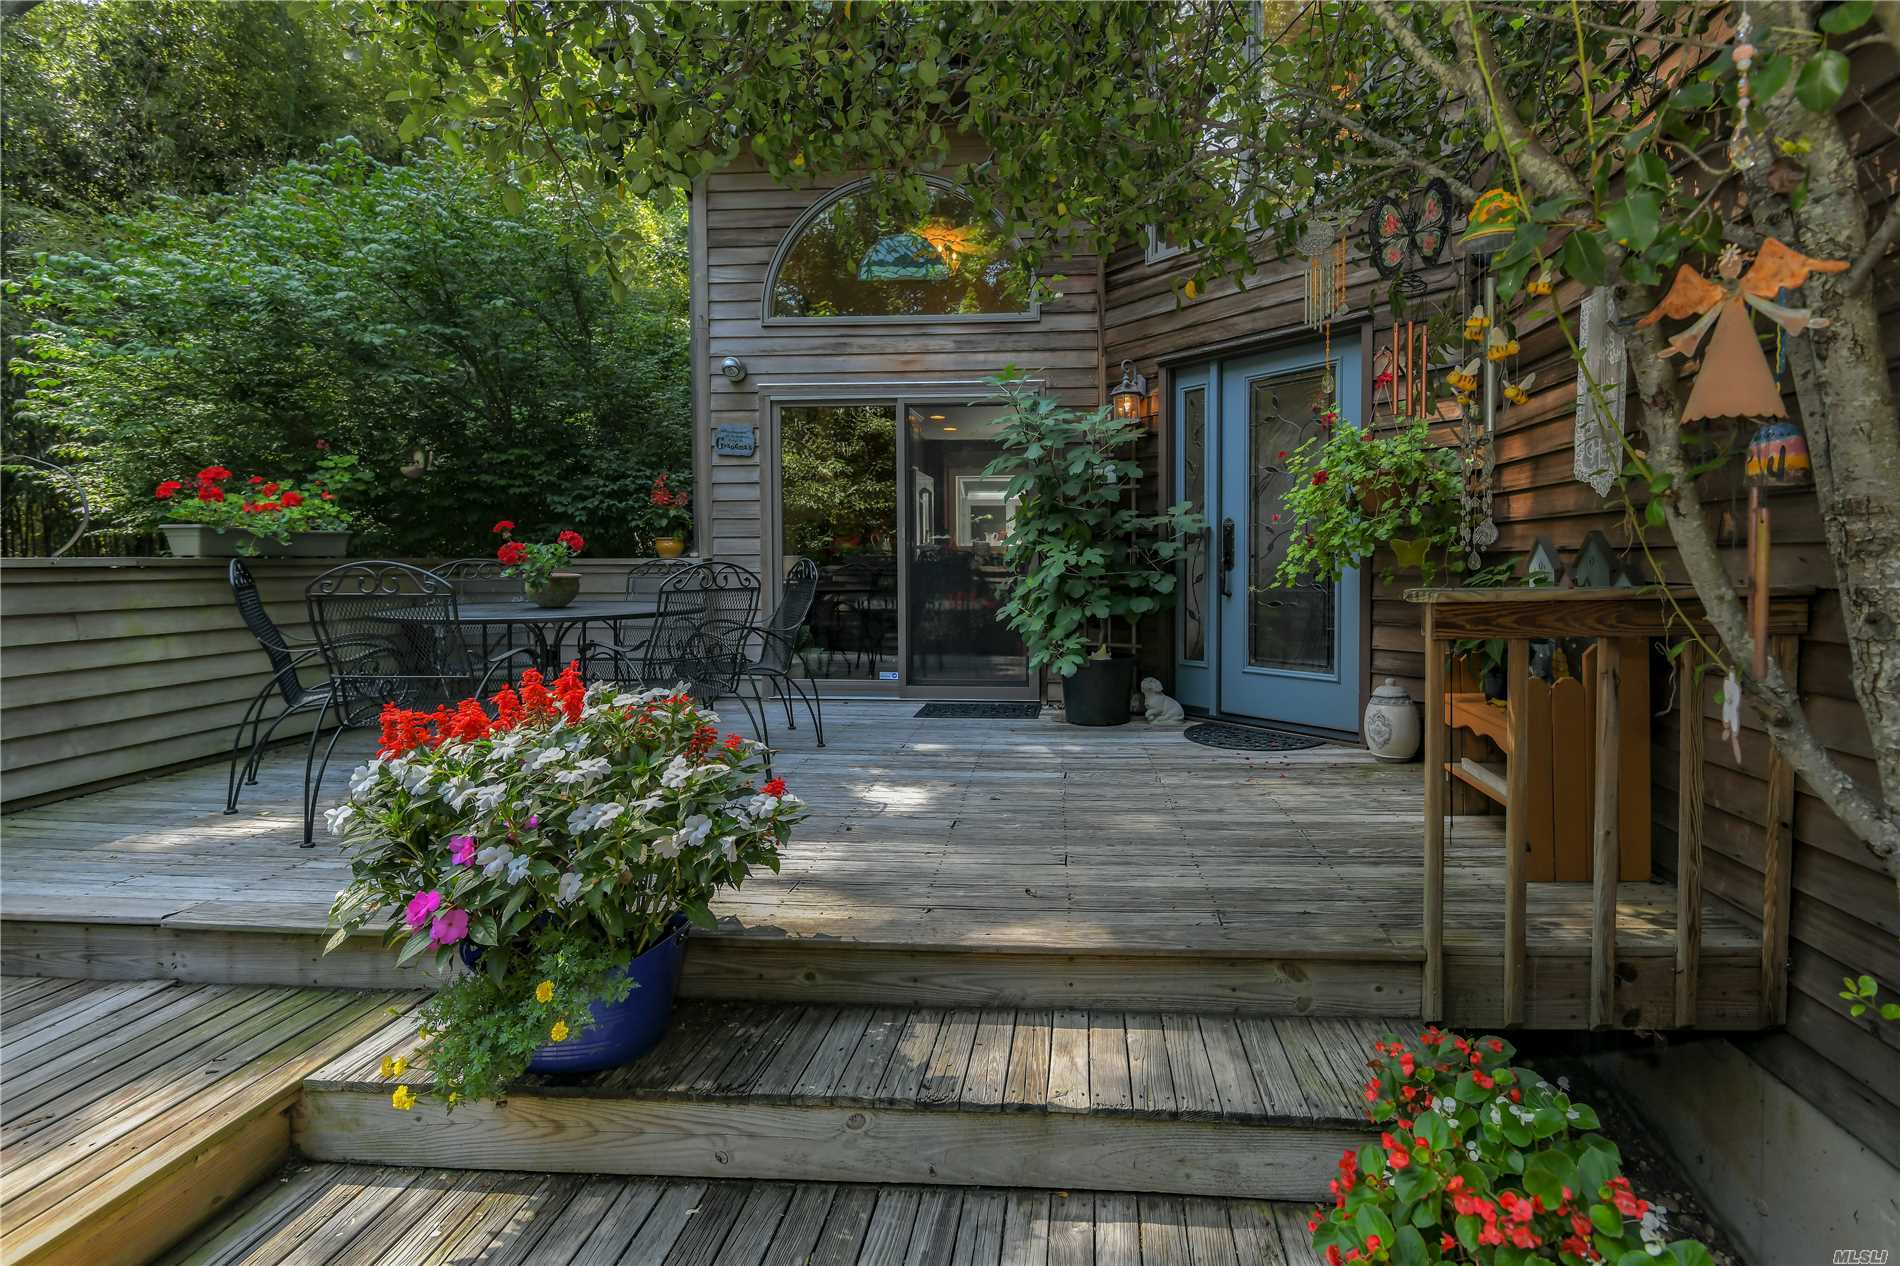 Privacy, Trees And An Artist Studio Are Just Some Of The Features This Traditionally Decorated Home With A Rustic Exterior Offers. Designed For Low Maintenance And Entertaining, This Is The Perfect Weekend Getaway. Close To Goose Creek Beach And Everything Else The North Fork Has To Offer!